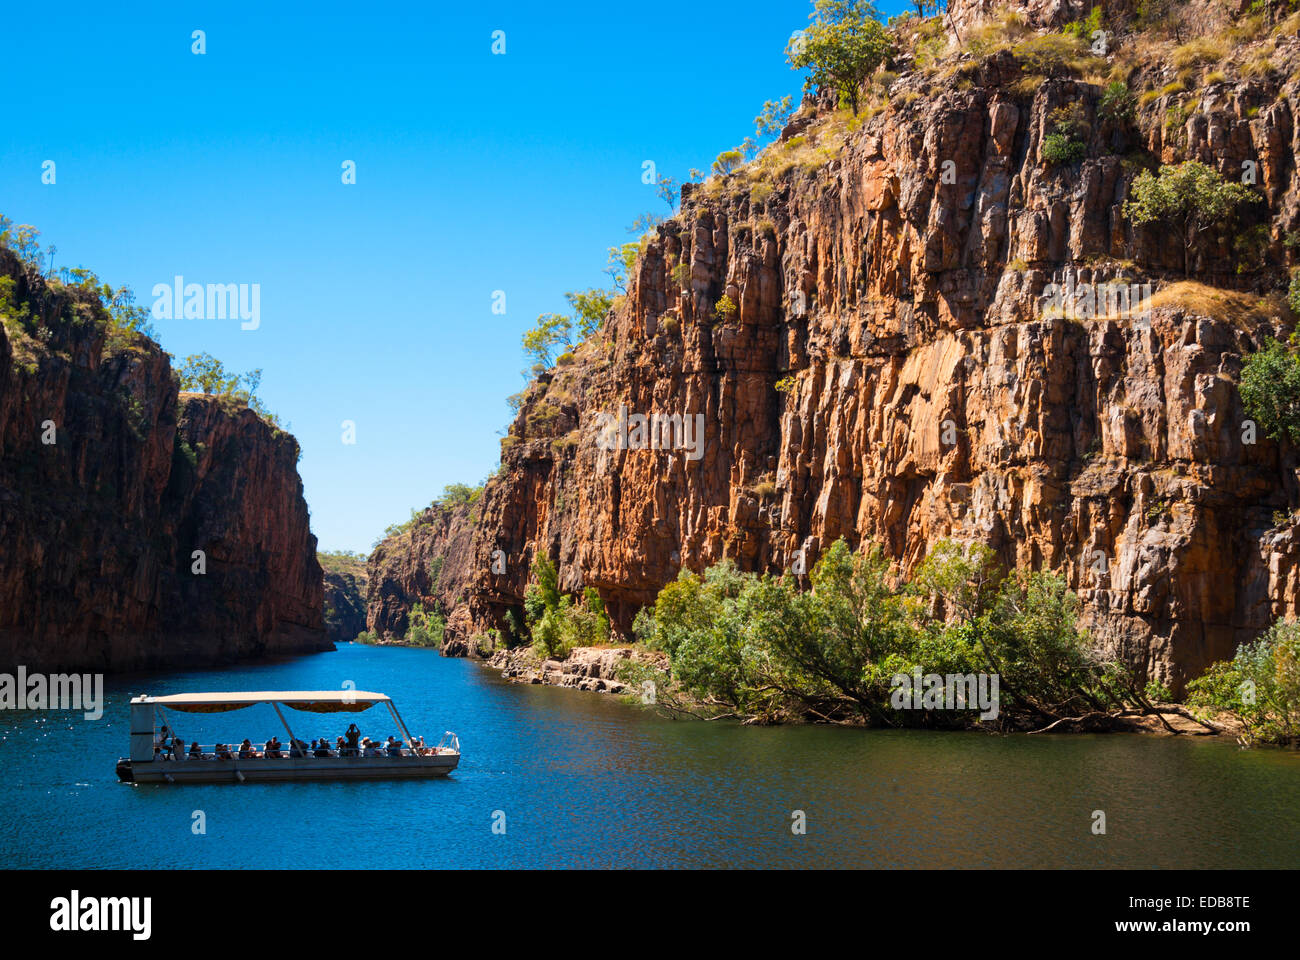 A cruise tour boat in the iconic Katherine Gorge, Northern Territory, Australia Stock Photo